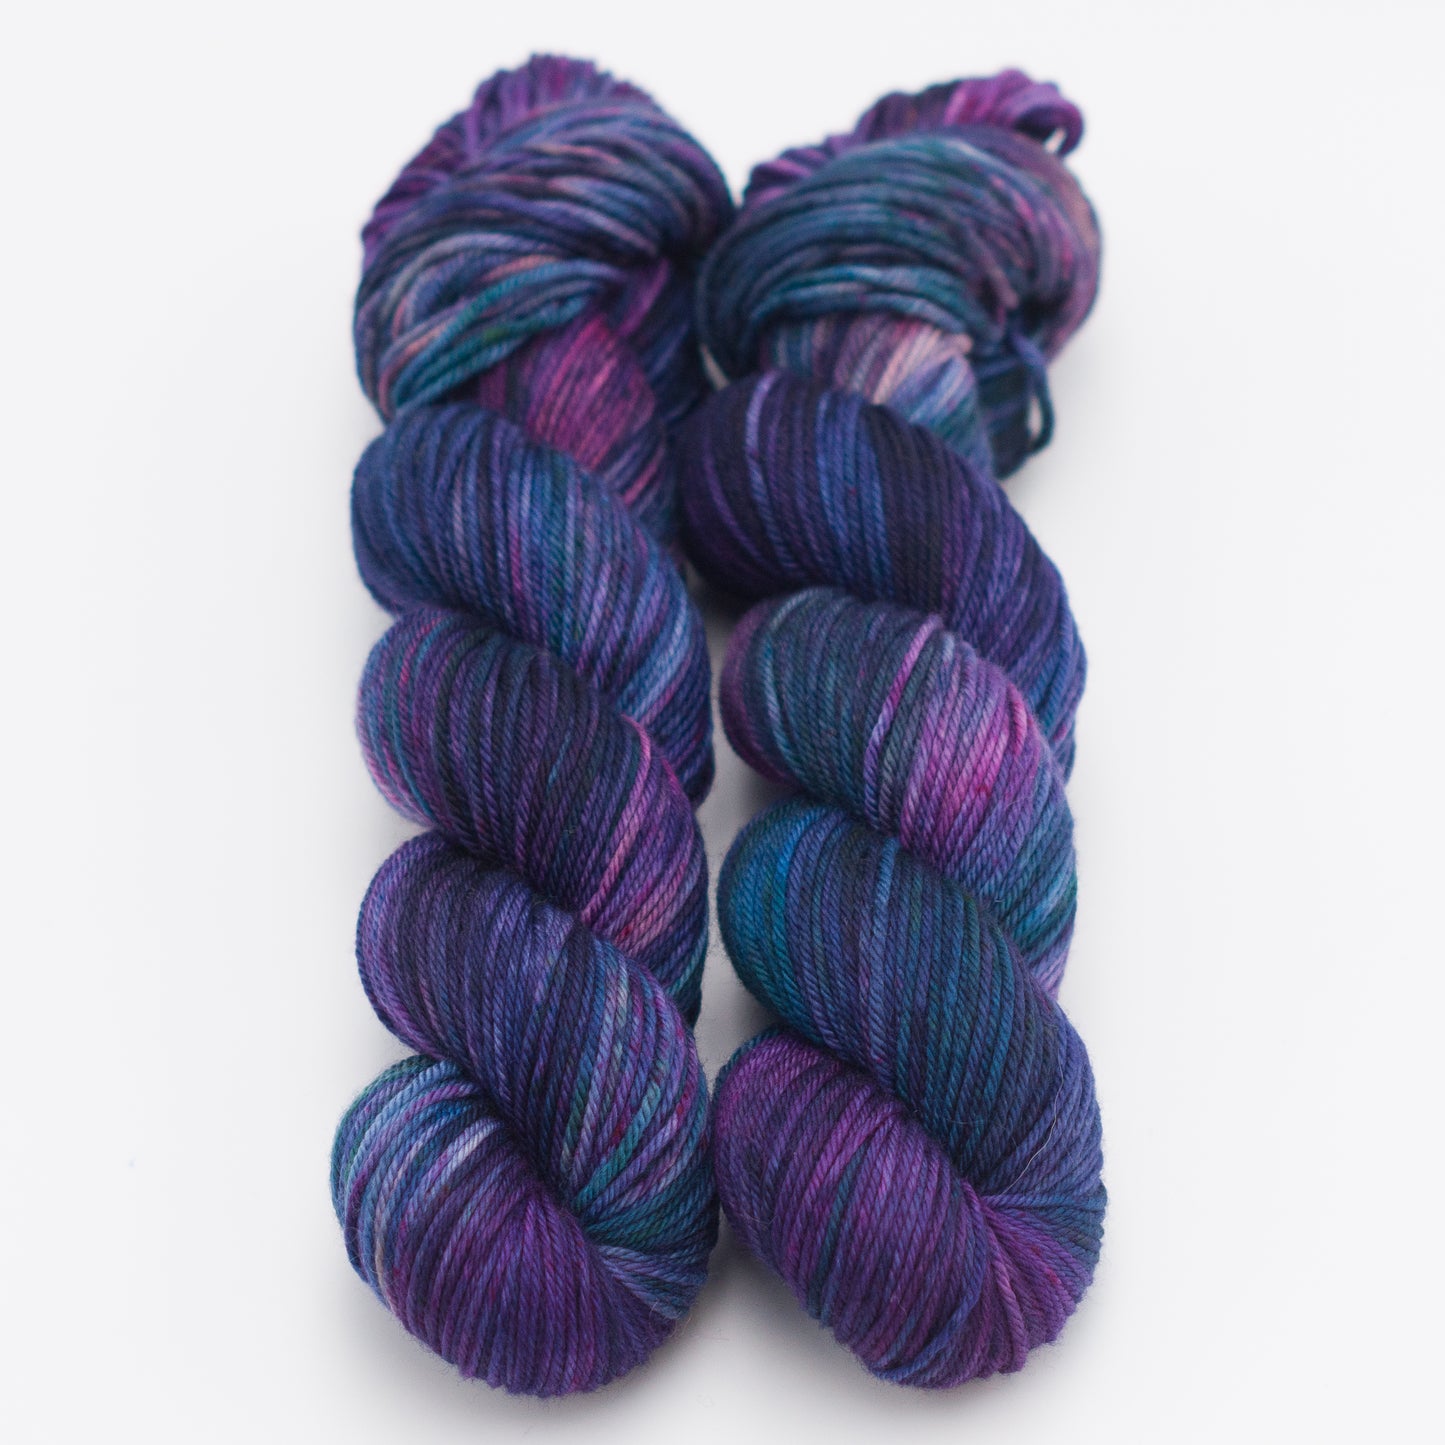 You Are No One's Subject - Merino DK